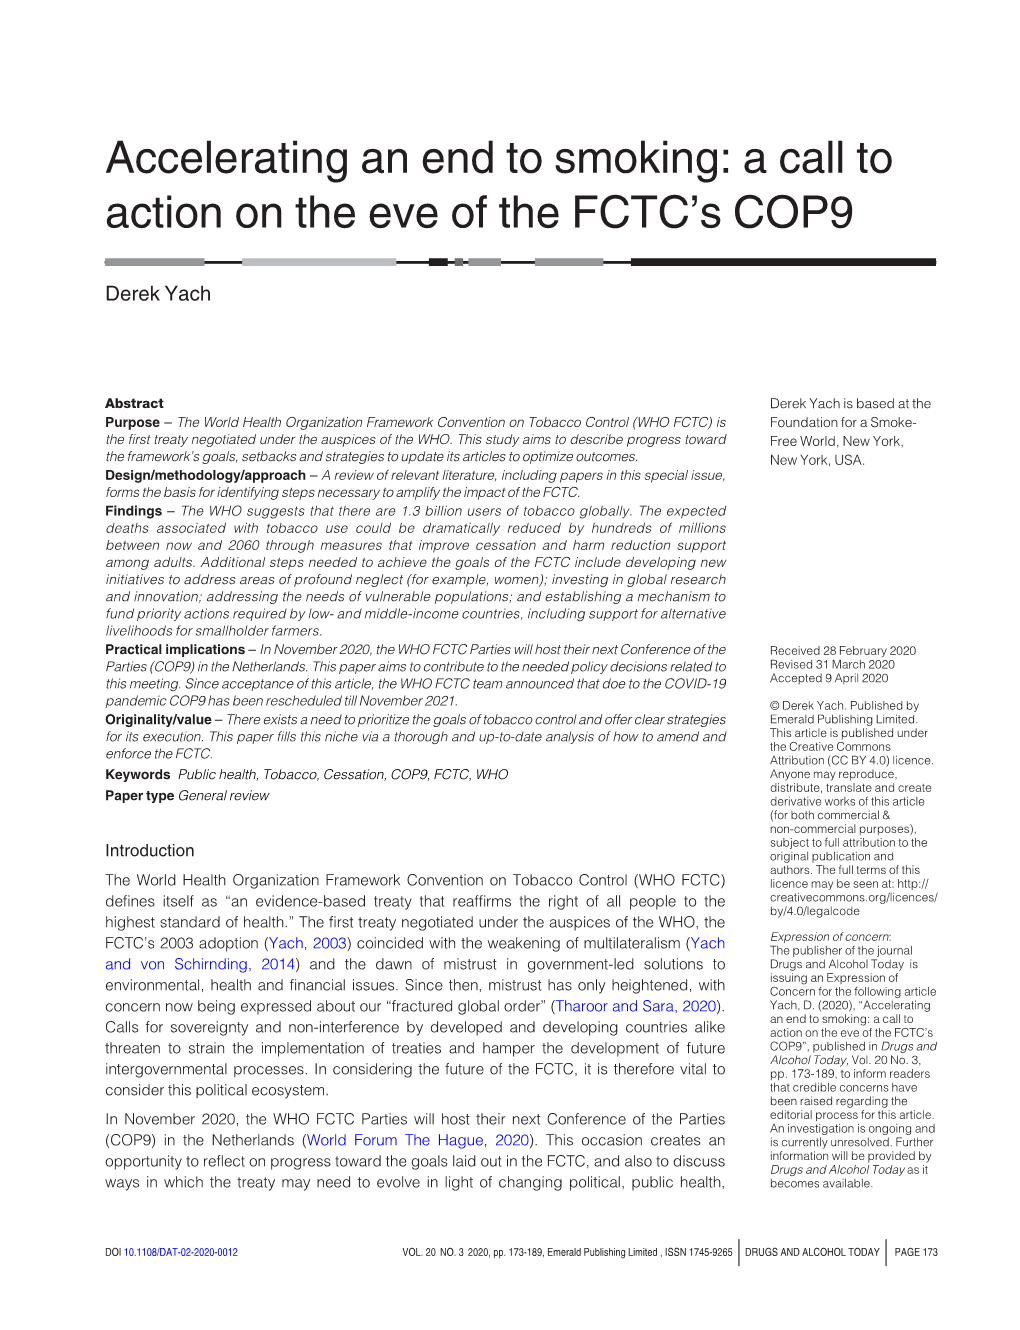 Accelerating an End to Smoking: a Call to Action on the Eve of the FCTC's COP9